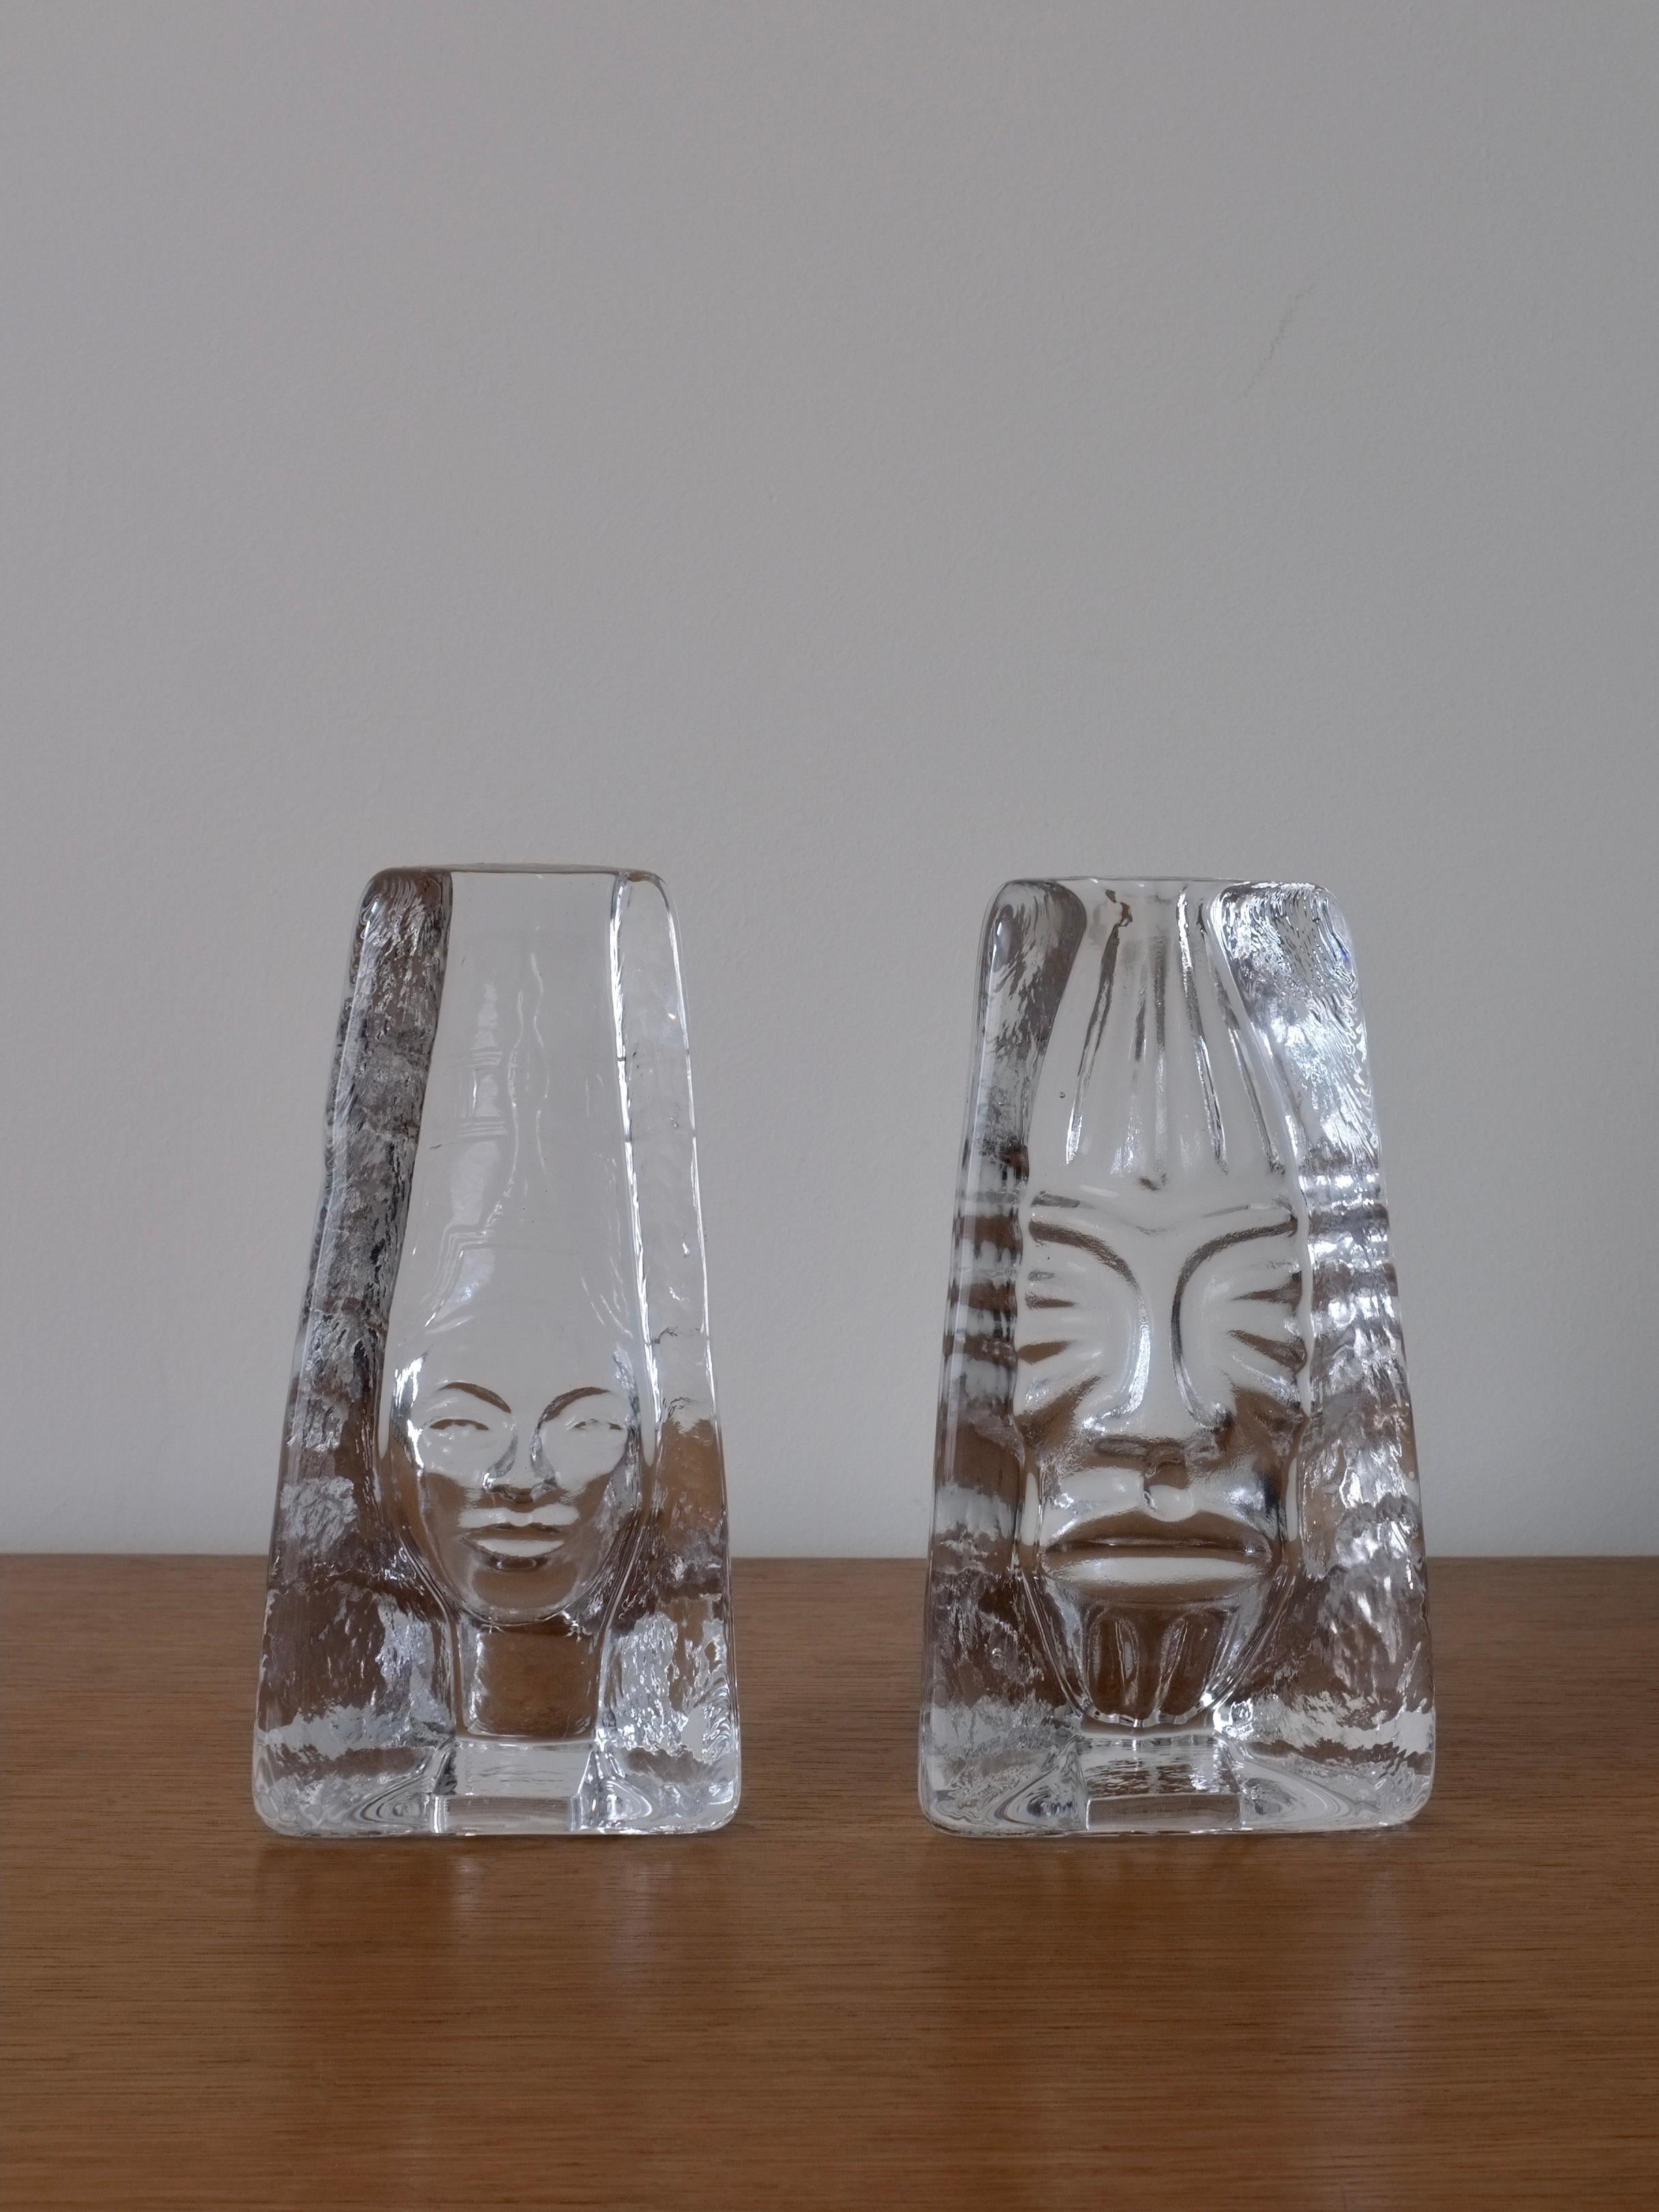 Set of 2 vintage brutalist clear glass sculptures from the Moai Series designed by Renate Stock-Paulsson in the 1990s (in production until the 2000s) for Swedish Sea Glasbruk. Nefertiti and Mask.